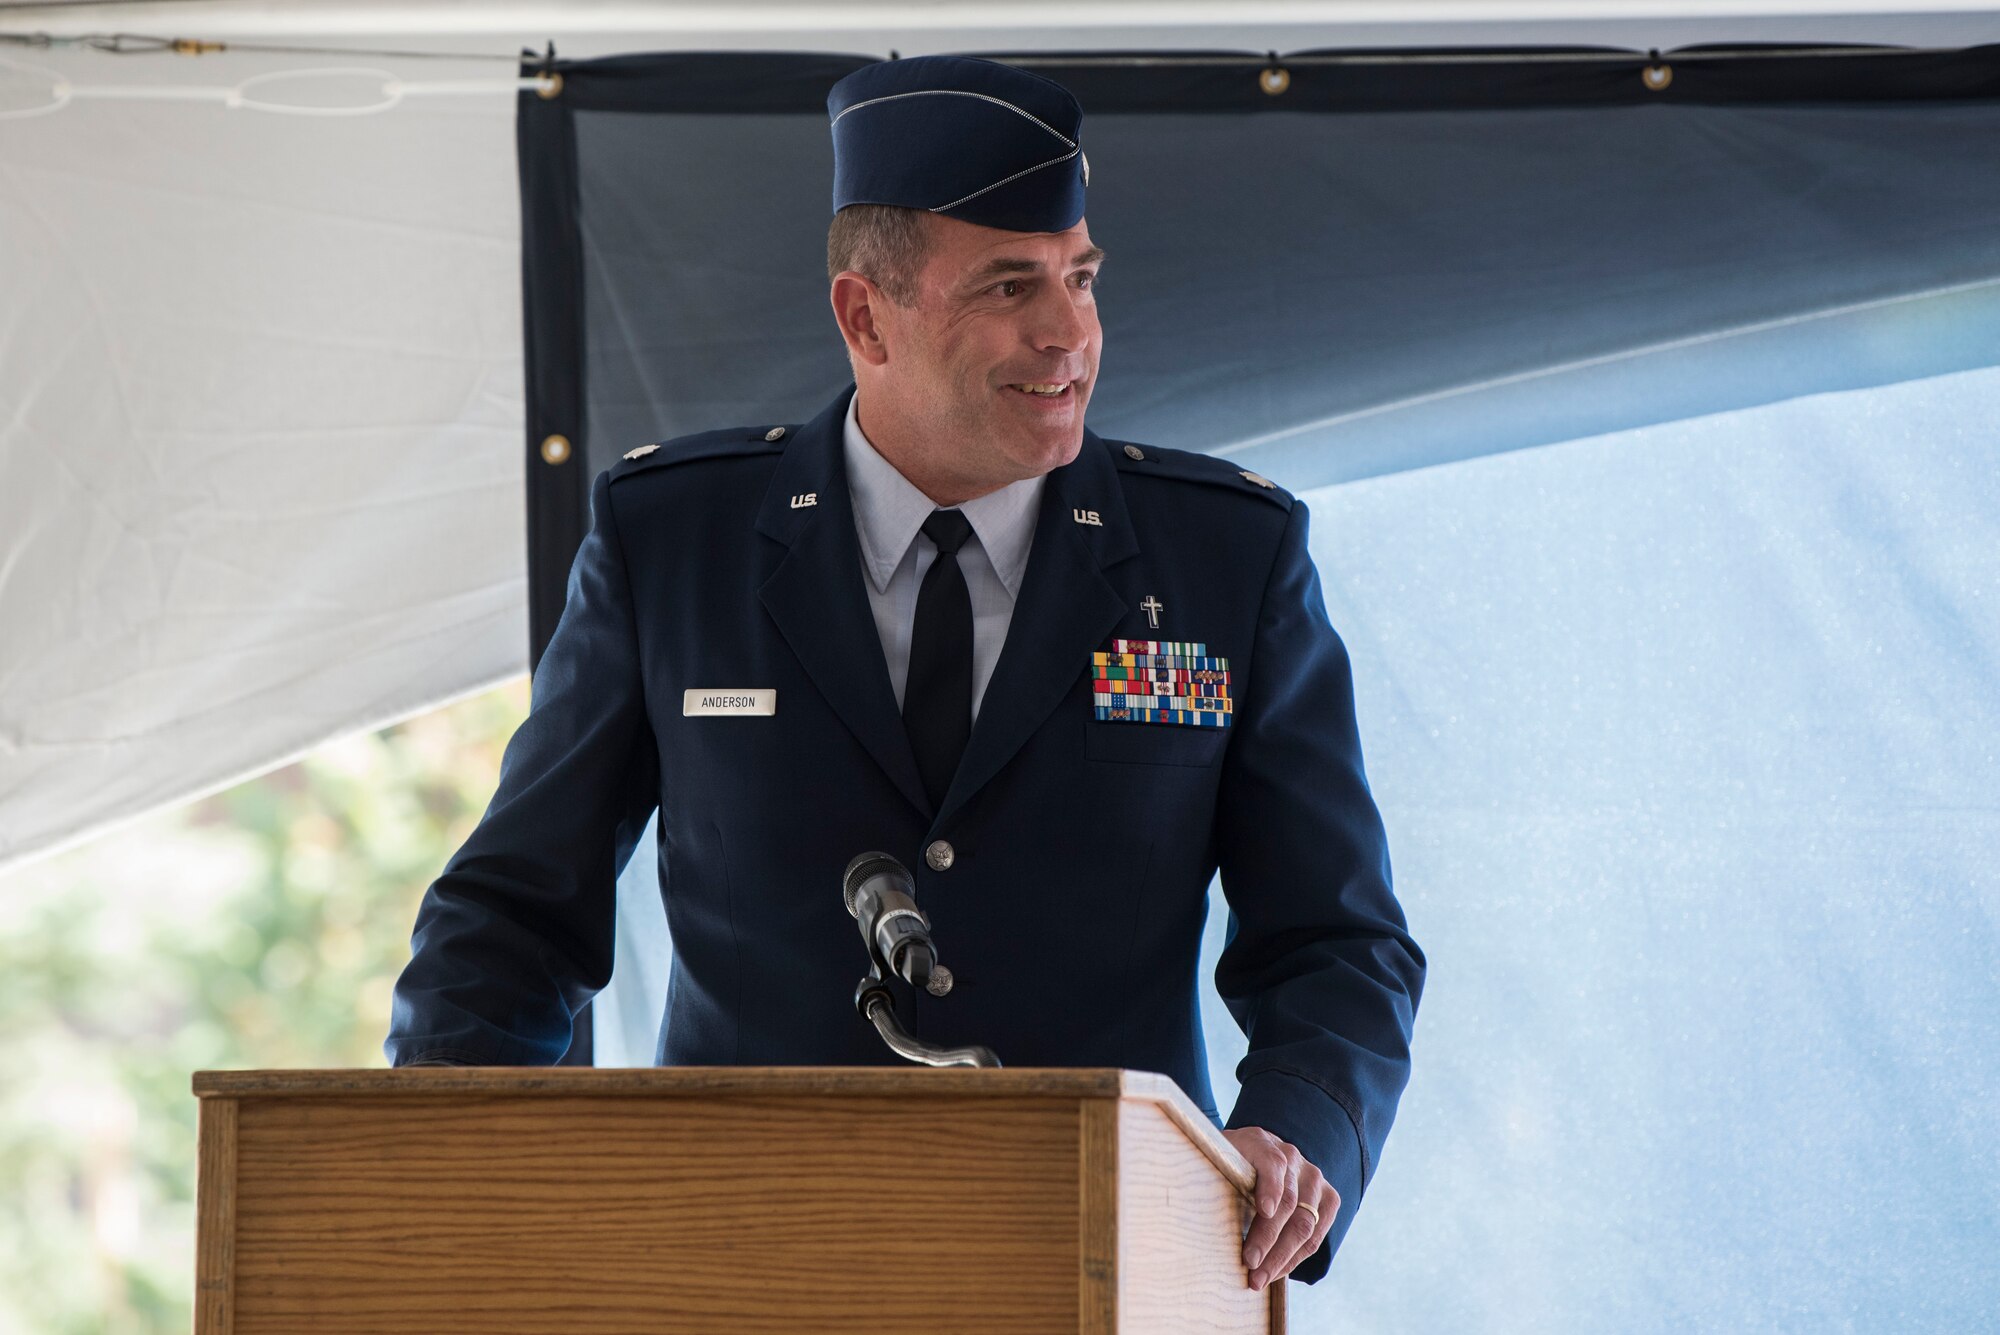 U.S. Air Force Deputy Chaplain (Lt. Col.) James Anderson, shares his experience with the Fisher House during the opening ceremony for Fisher House II at Joint Base Elmendorf-Richardson, Alaska, Sep. 10, 2018. The opening ceremony featured an array of key speakers, the 9th Army Band, Air Force Honor Guard, a ribbon-cutting and a walk-through. The Fisher House program is a unique private-public partnership established to improve the quality of life for military members, retirees, veterans and their families.